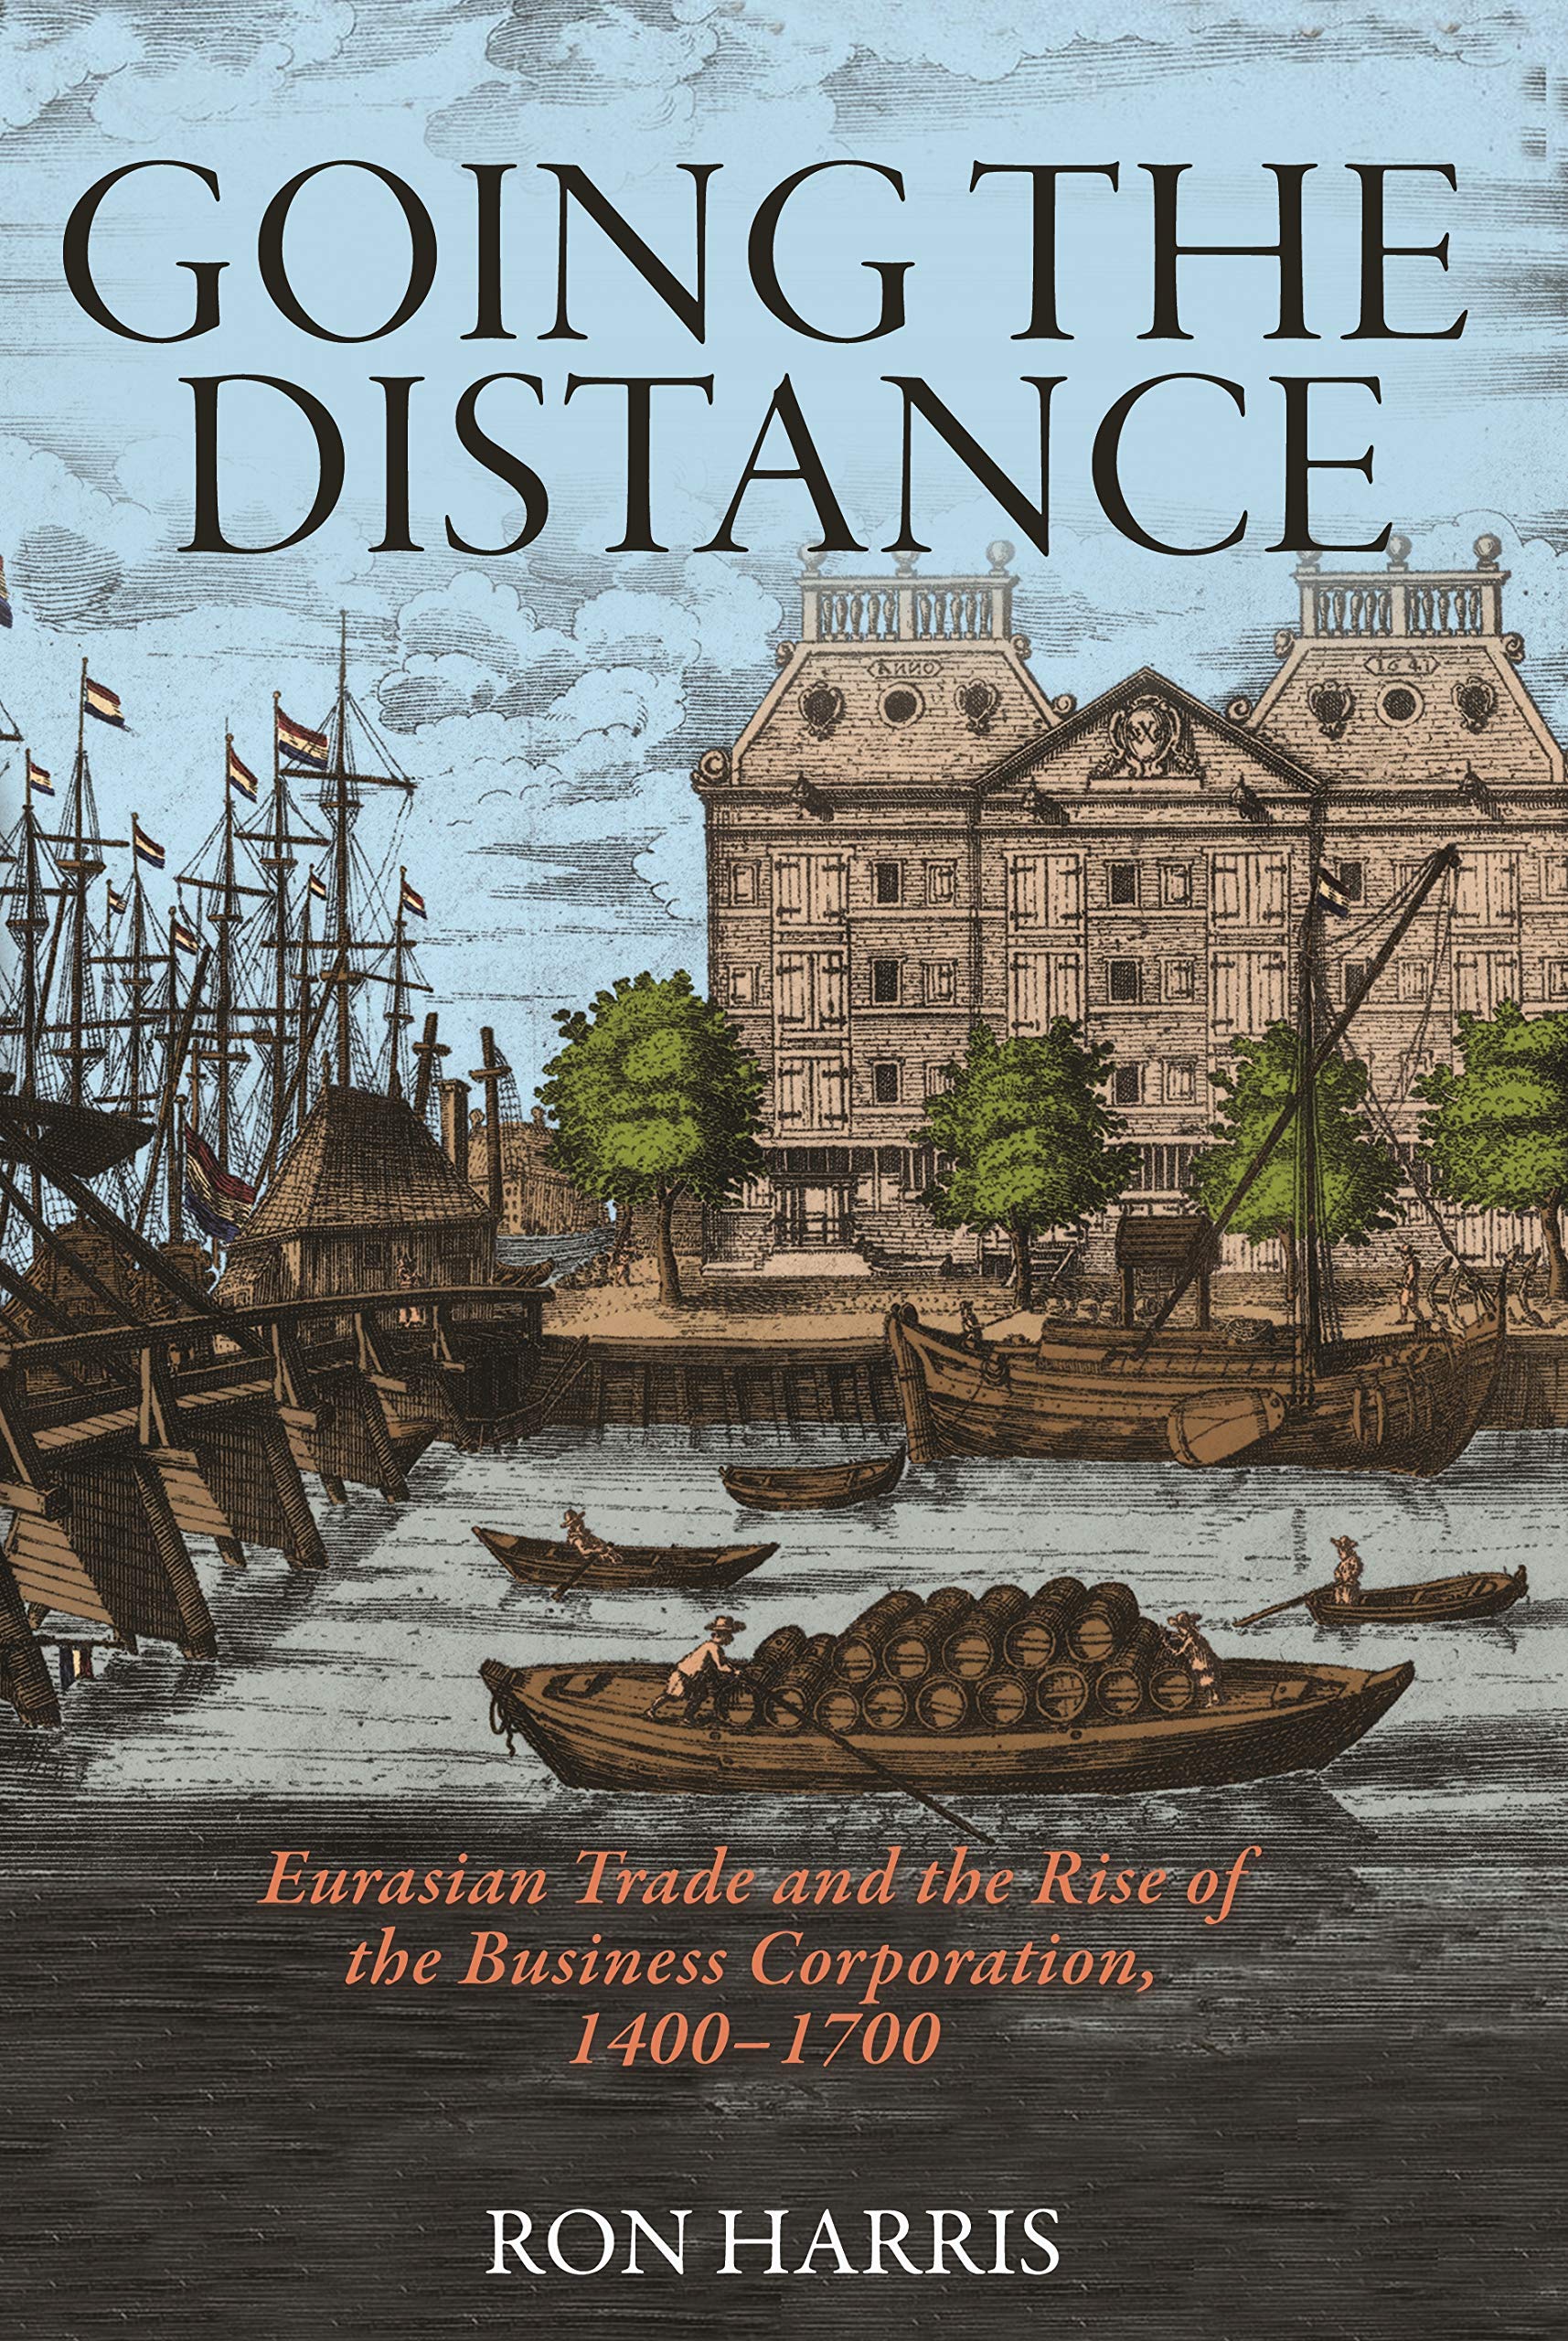 Going the Distance: Eurasian Trade and the Rise of the Business Corporation, 1400-1700 (The Princeton Economic History of the Western World, 82)